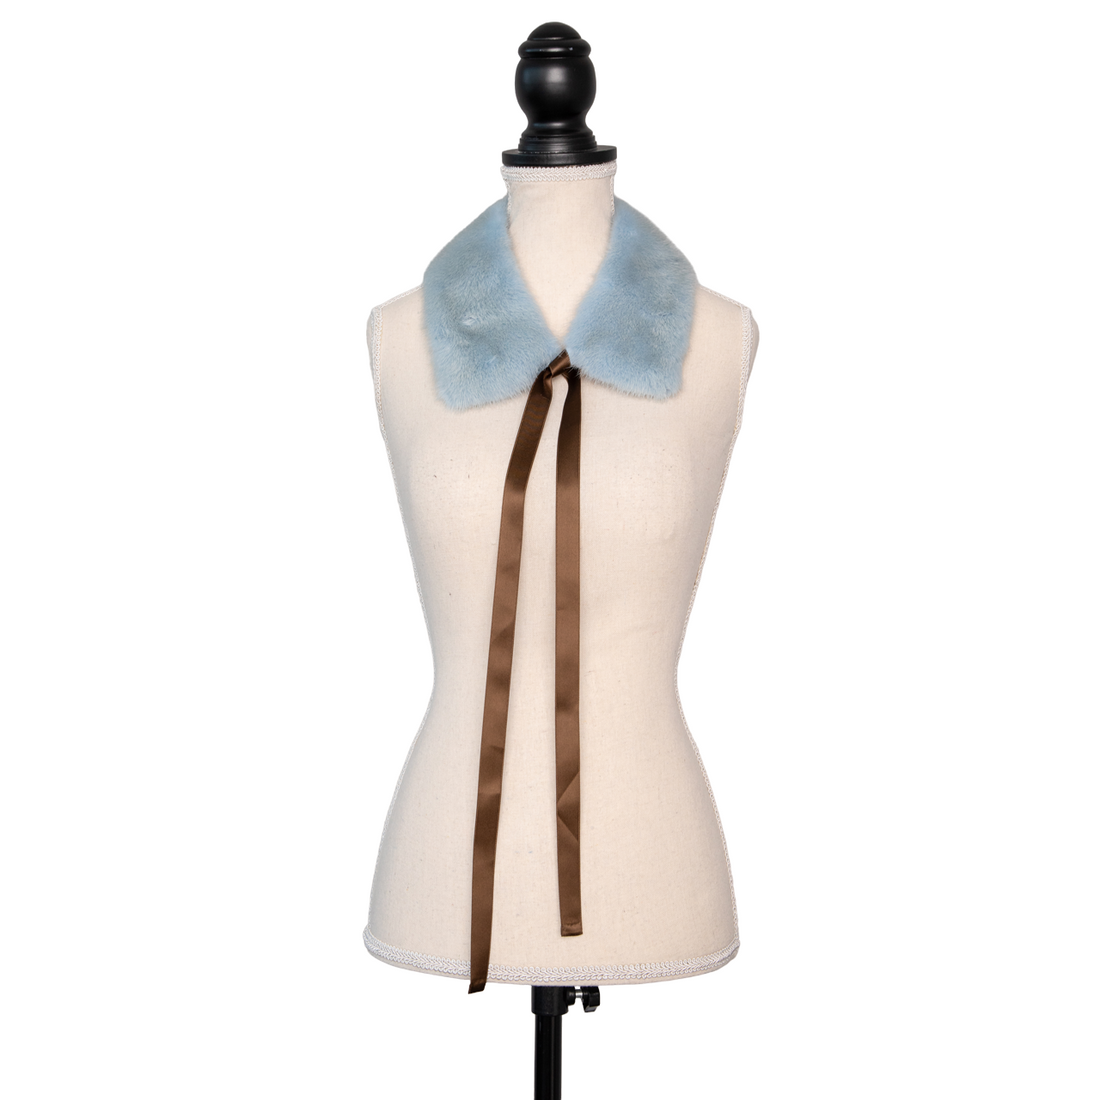 Gucci light blue mink collar with brown satin ribbons